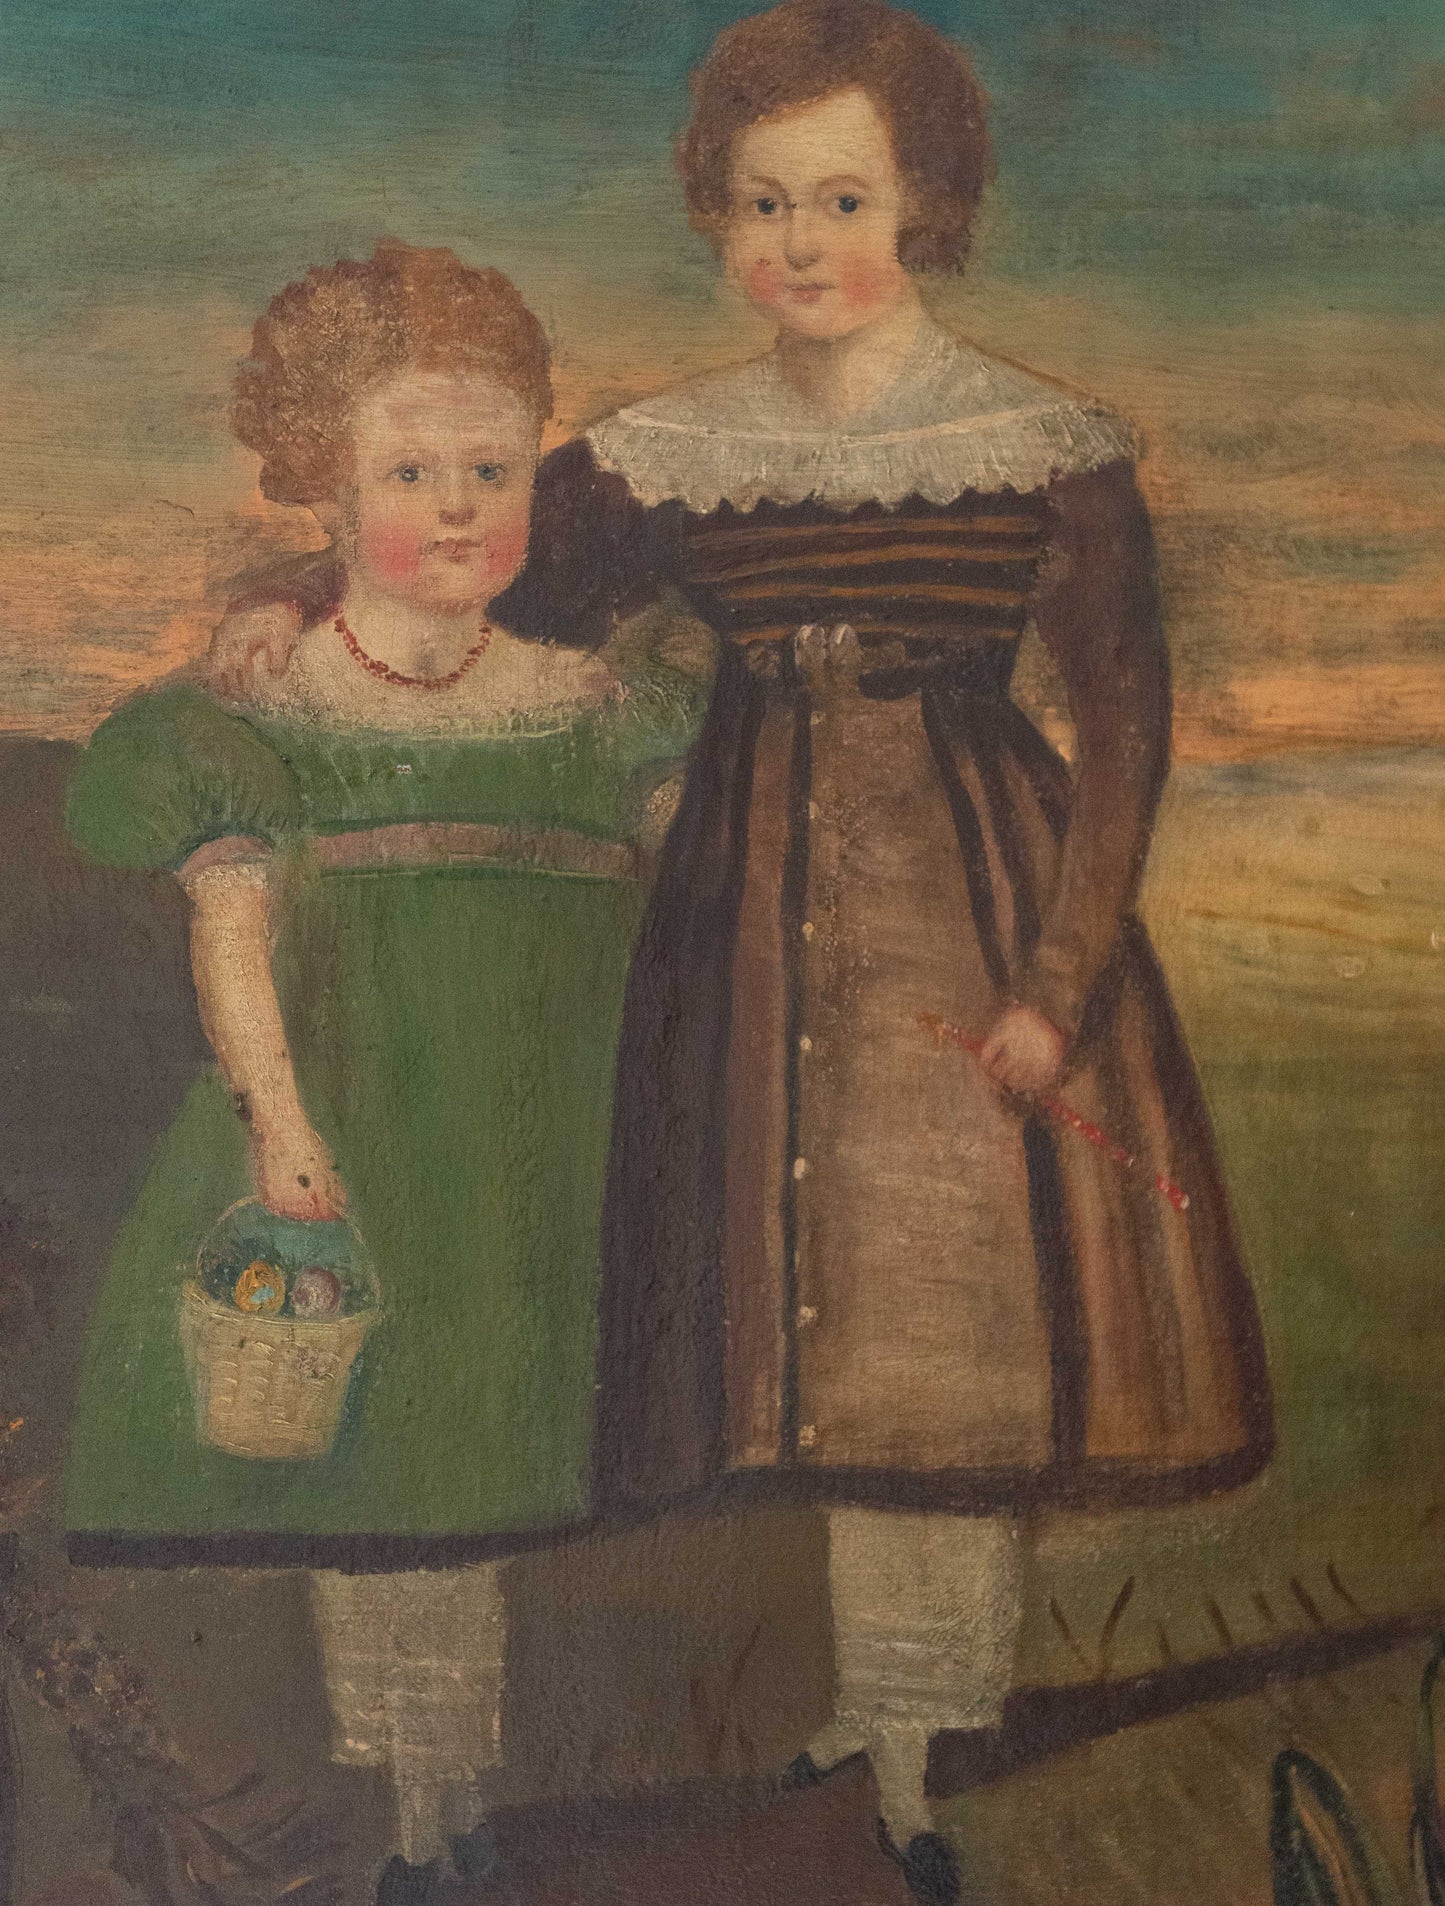 Large 19th century naive oil on canvas of two children standing in a landscape.